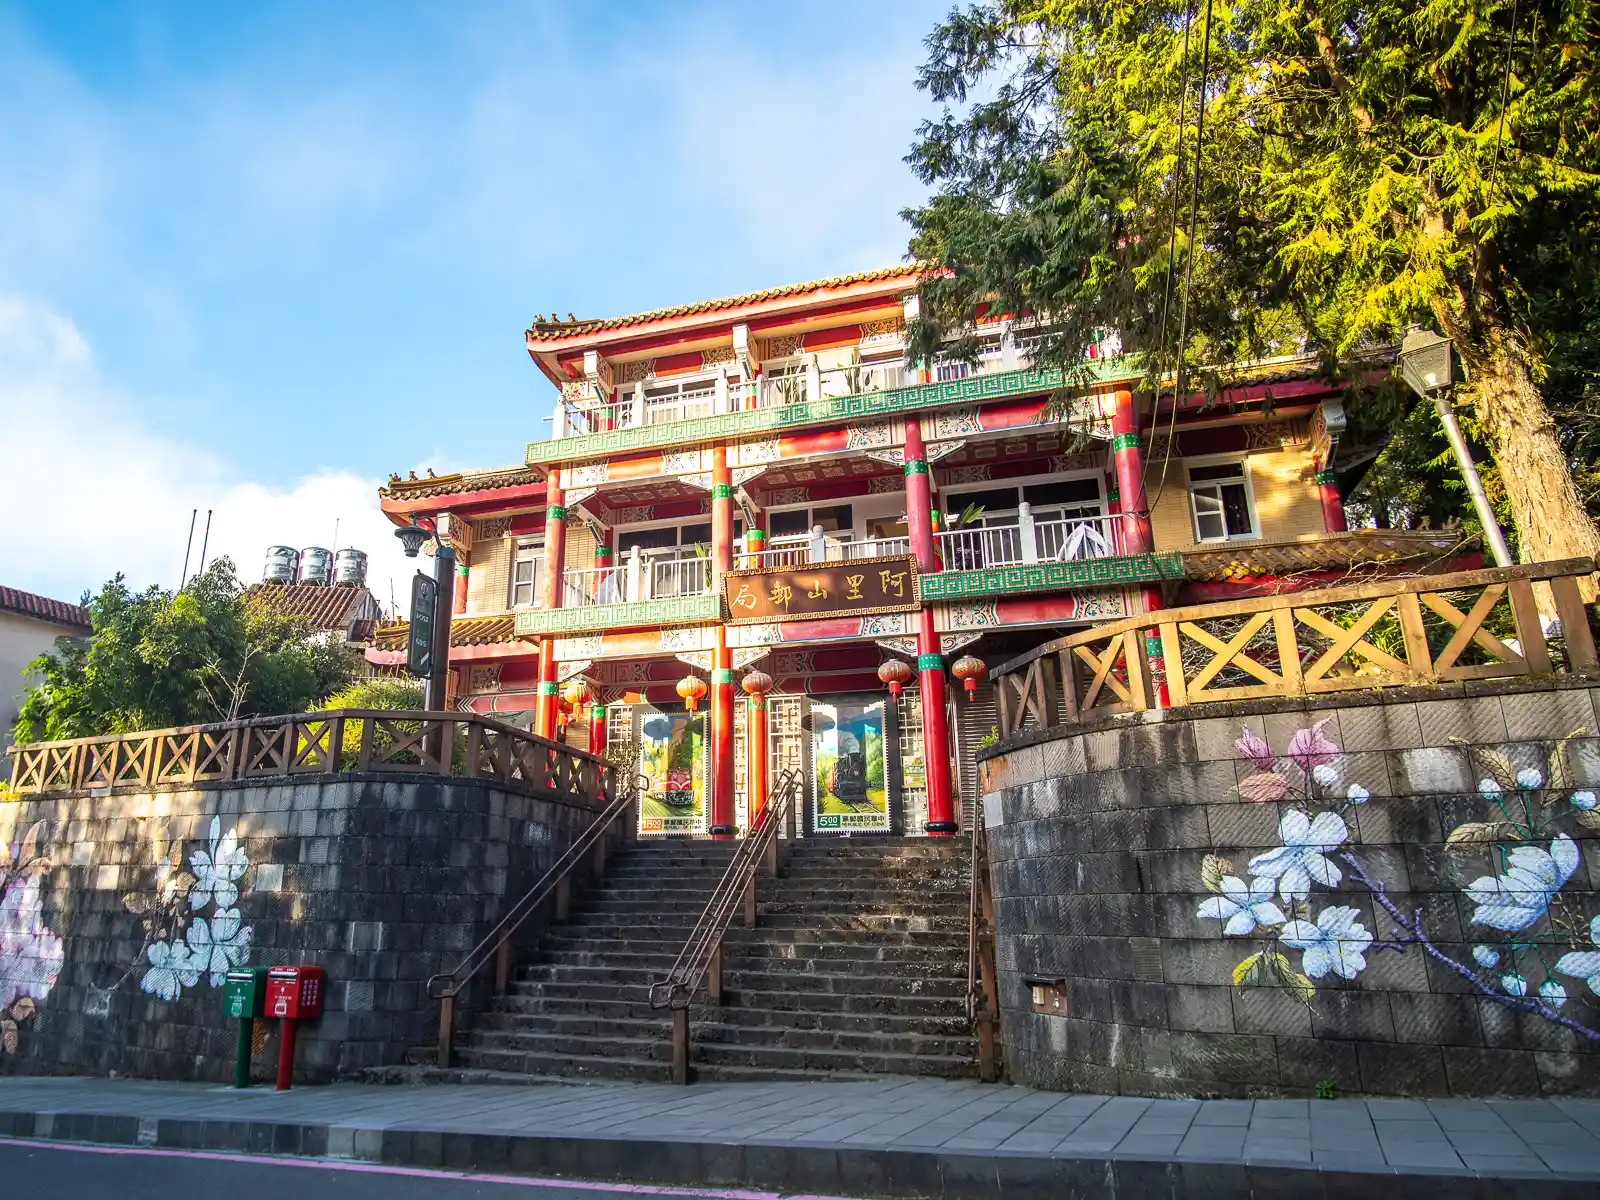 A view of the extremely colorful Alishan Post Office.